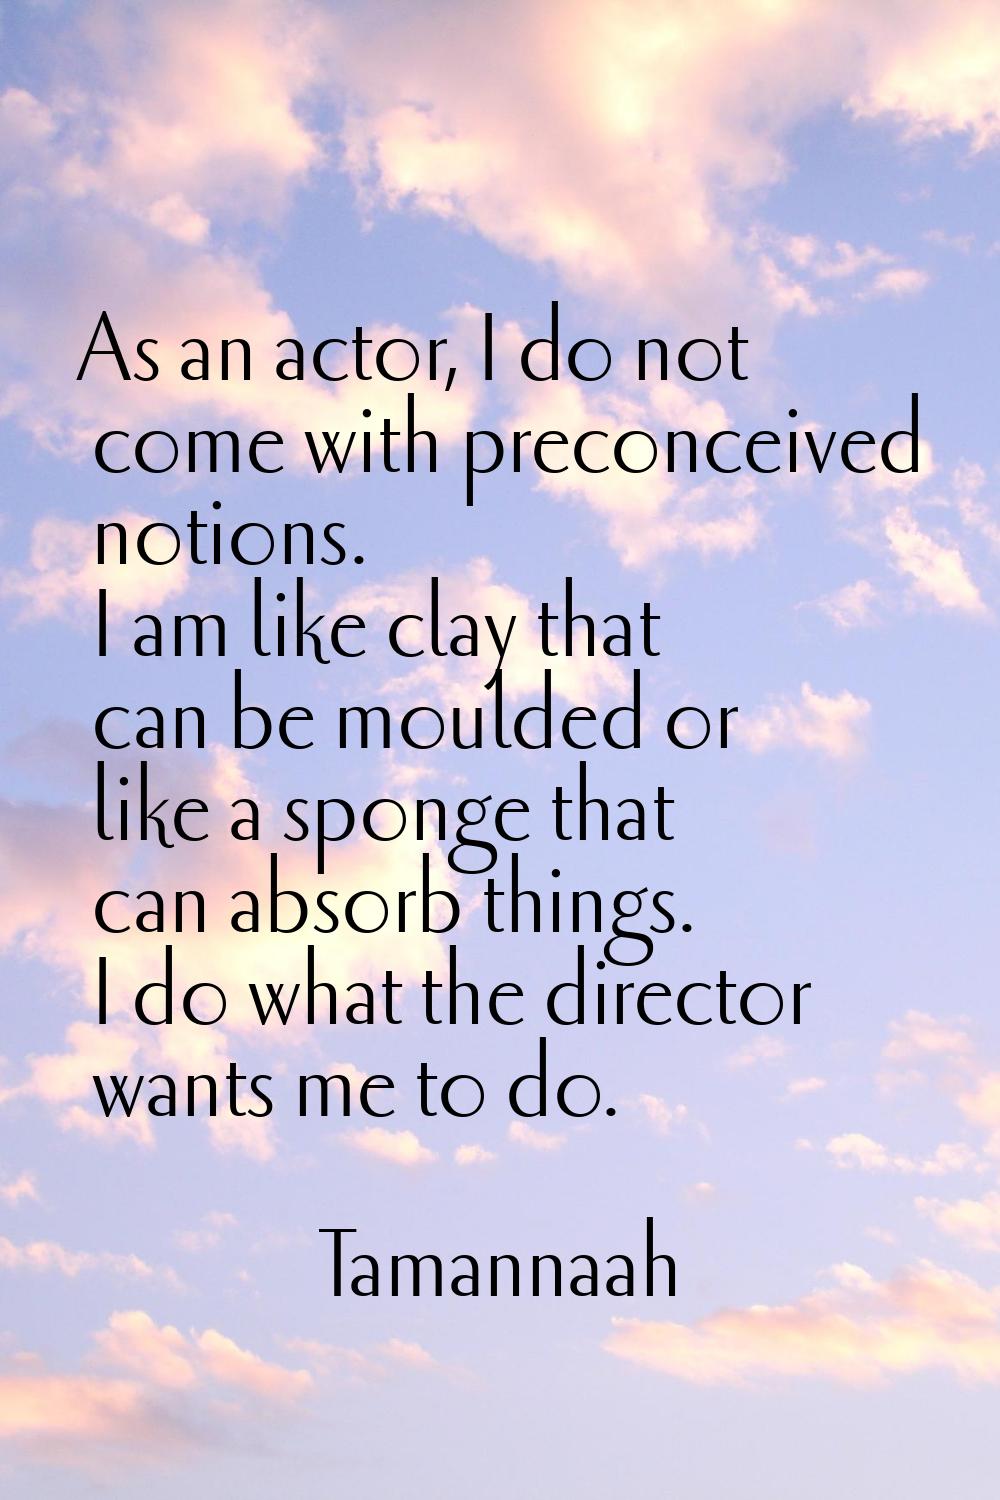 As an actor, I do not come with preconceived notions. I am like clay that can be moulded or like a 